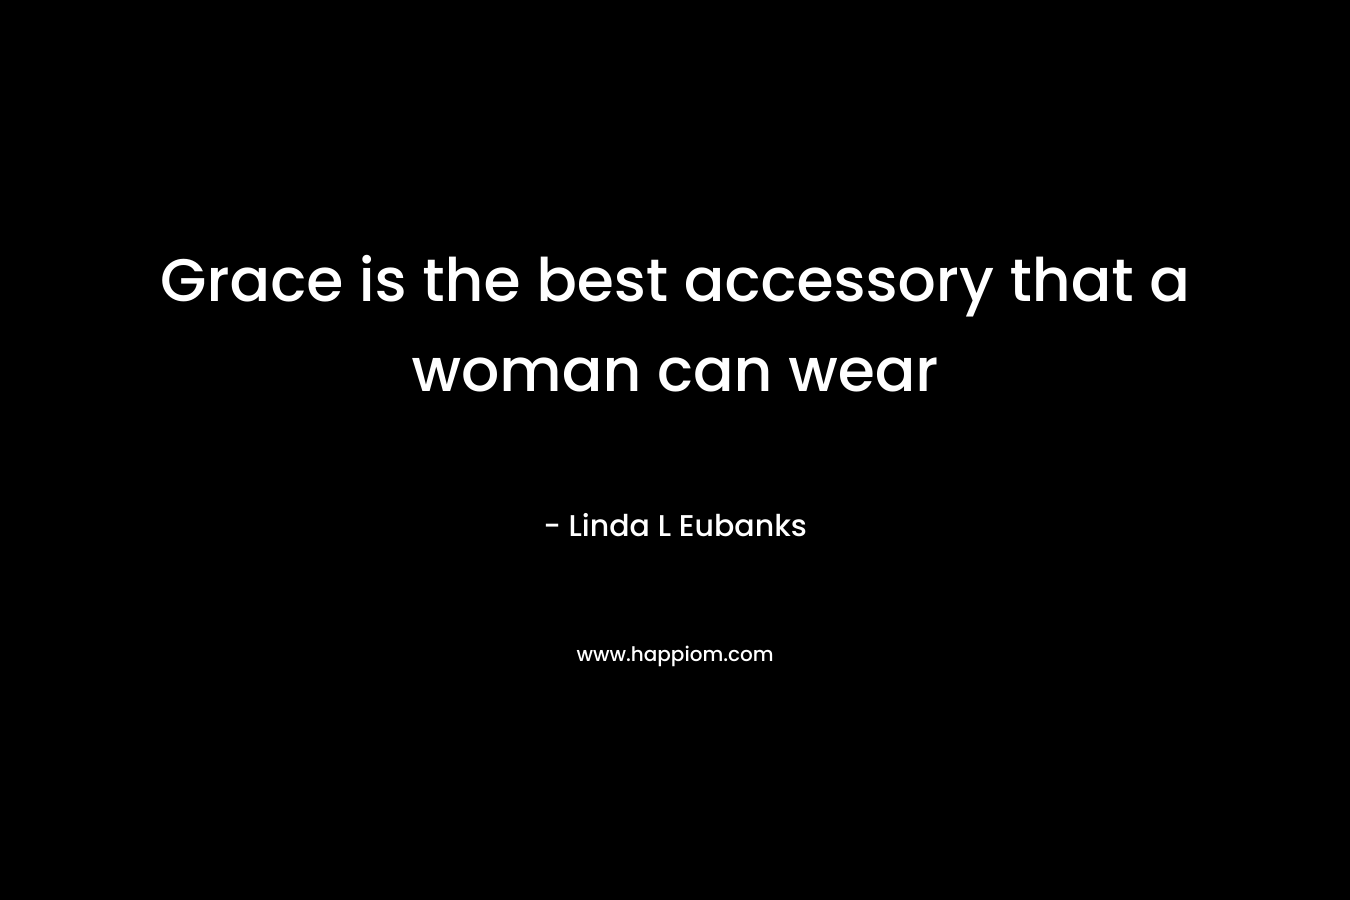 Grace is the best accessory that a woman can wear – Linda L Eubanks